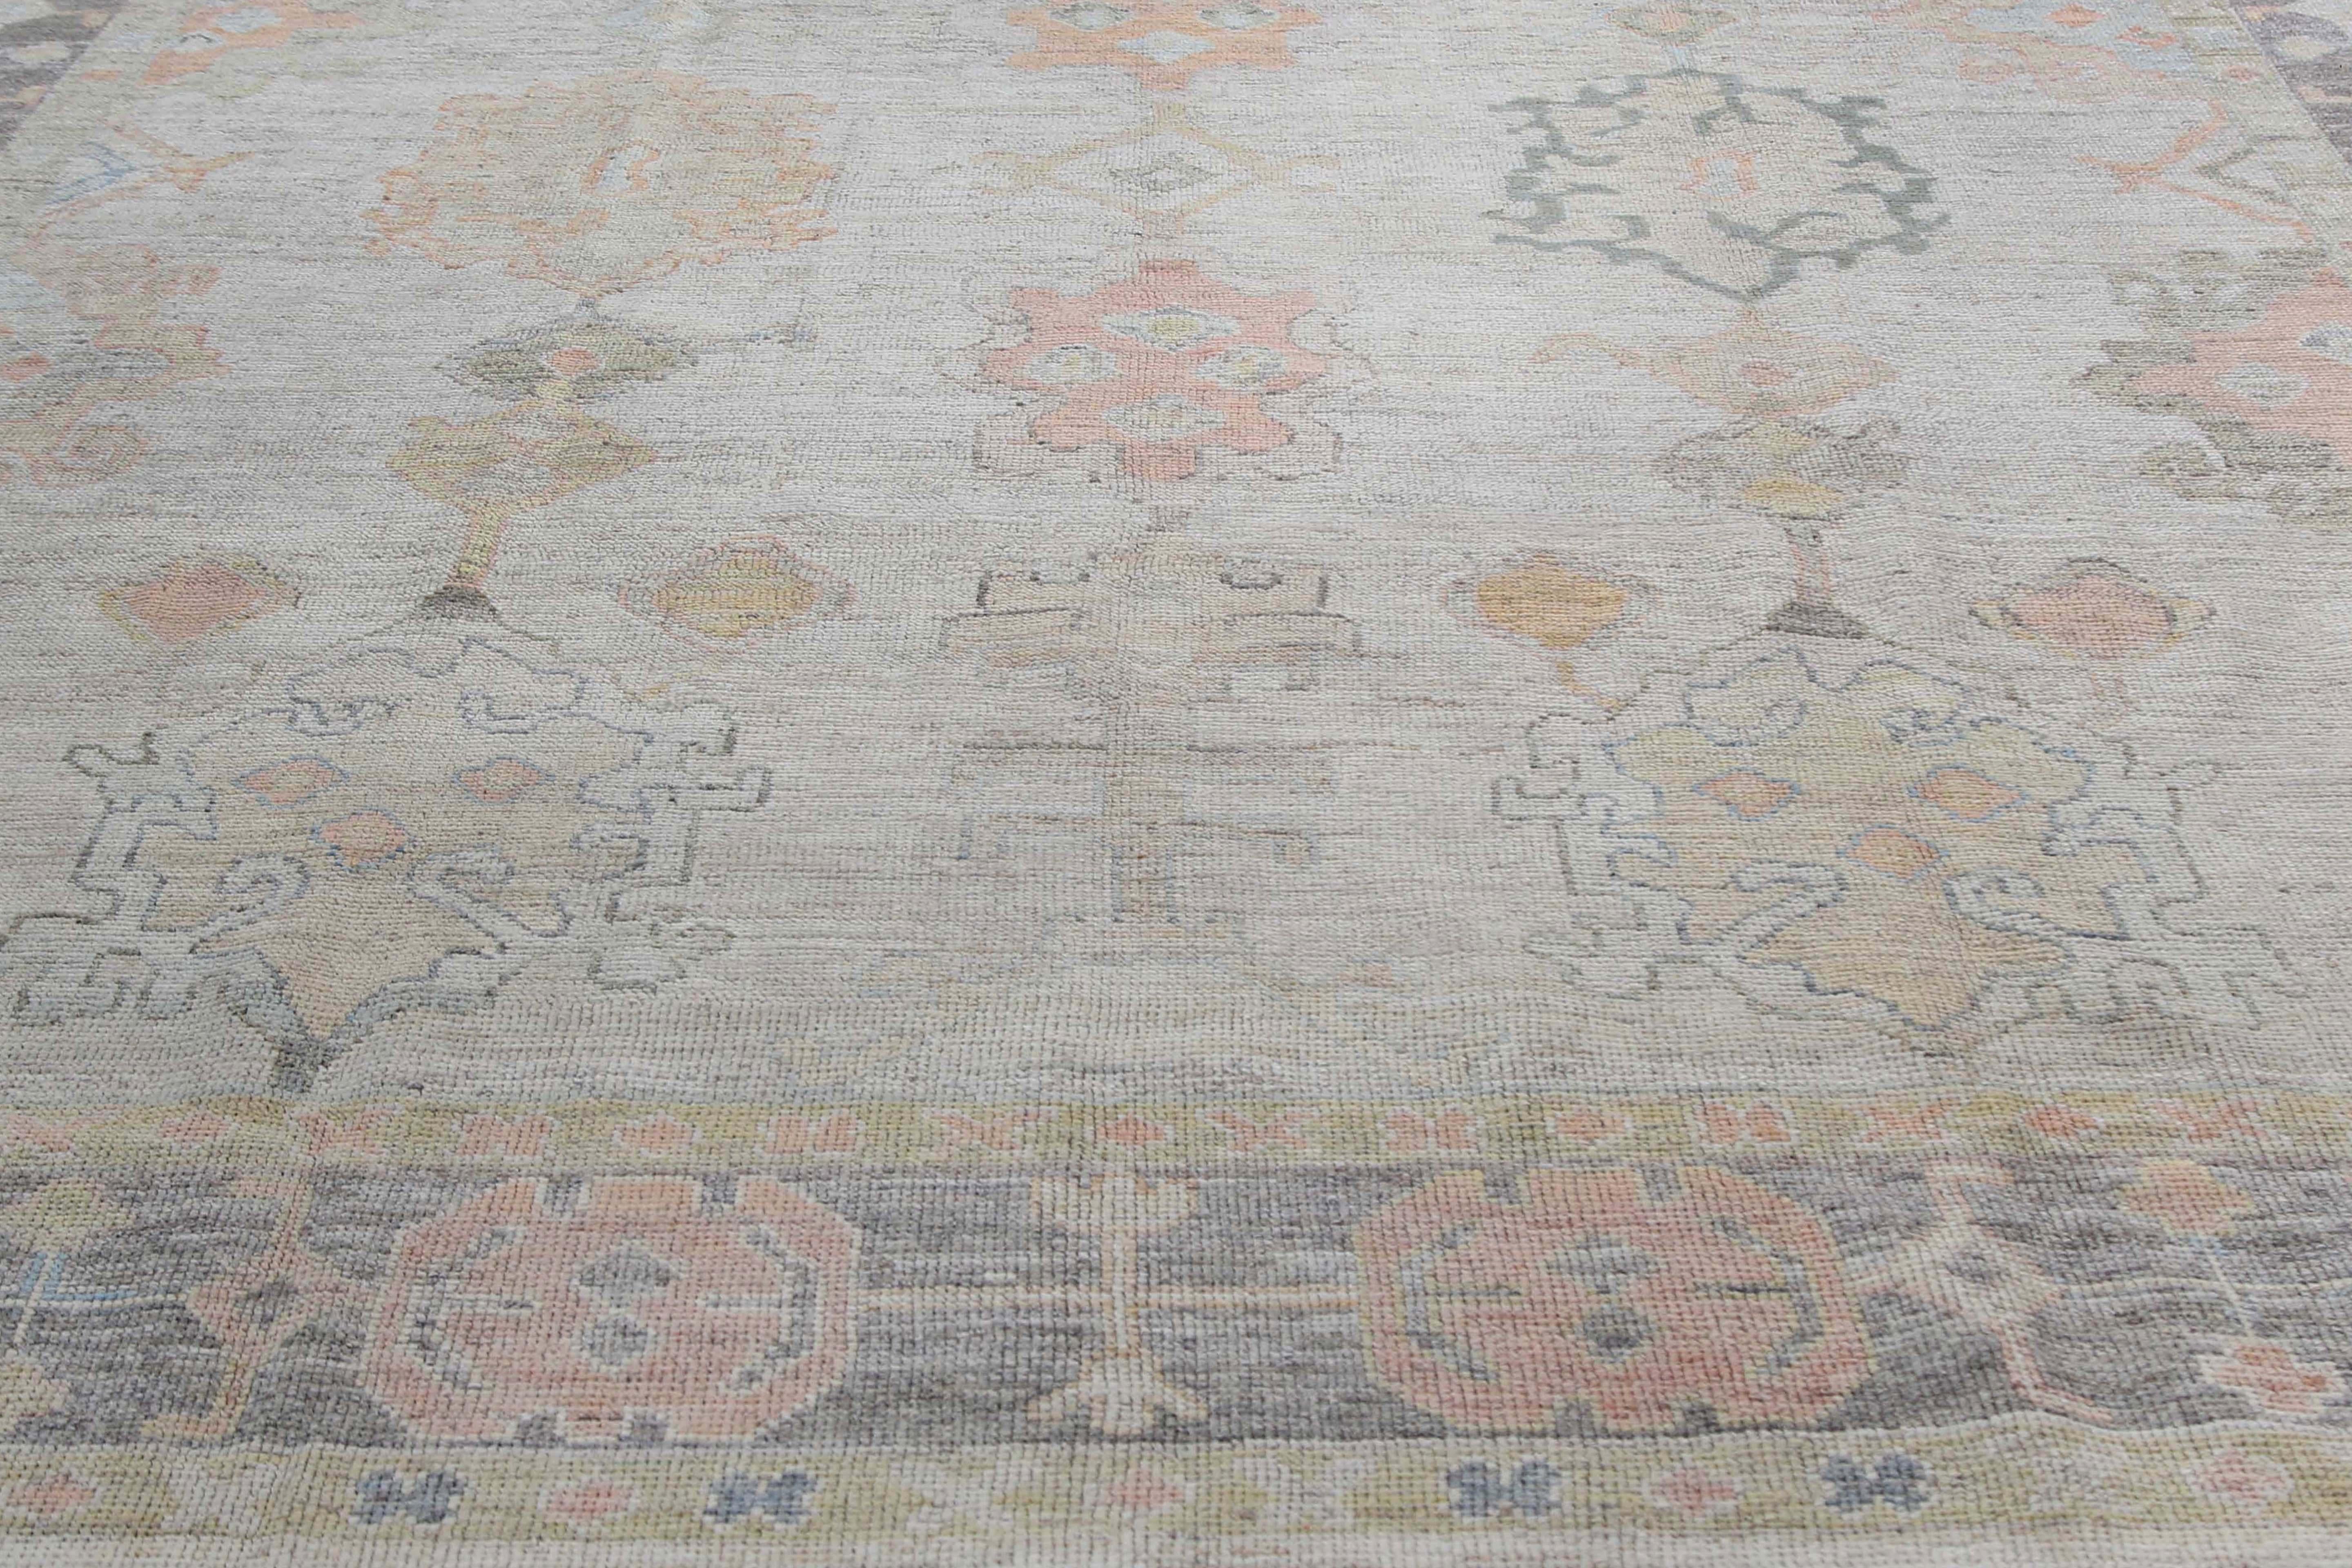 Introducing our exquisite handmade Turkish Oushak rug with a unique faded worn-down look. This rug features a defined border with a light green-grey background and a beautiful traditional design. The design incorporates various colors such as dark